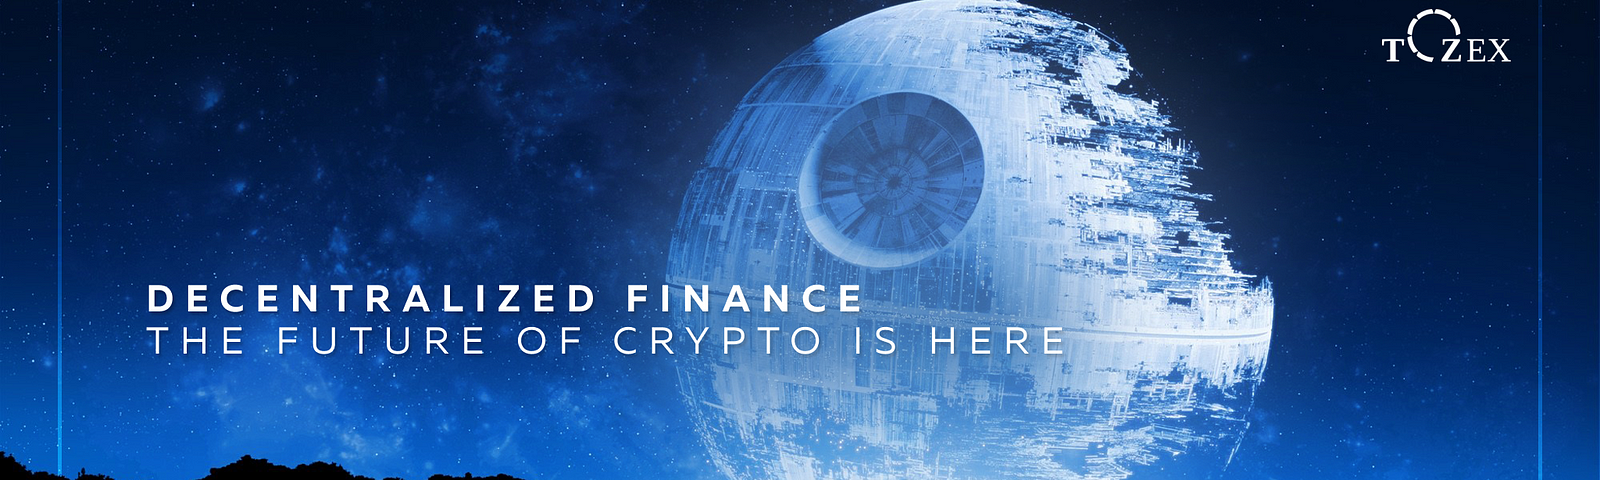 Decentralized Finance: The Future of Crypto Is Here